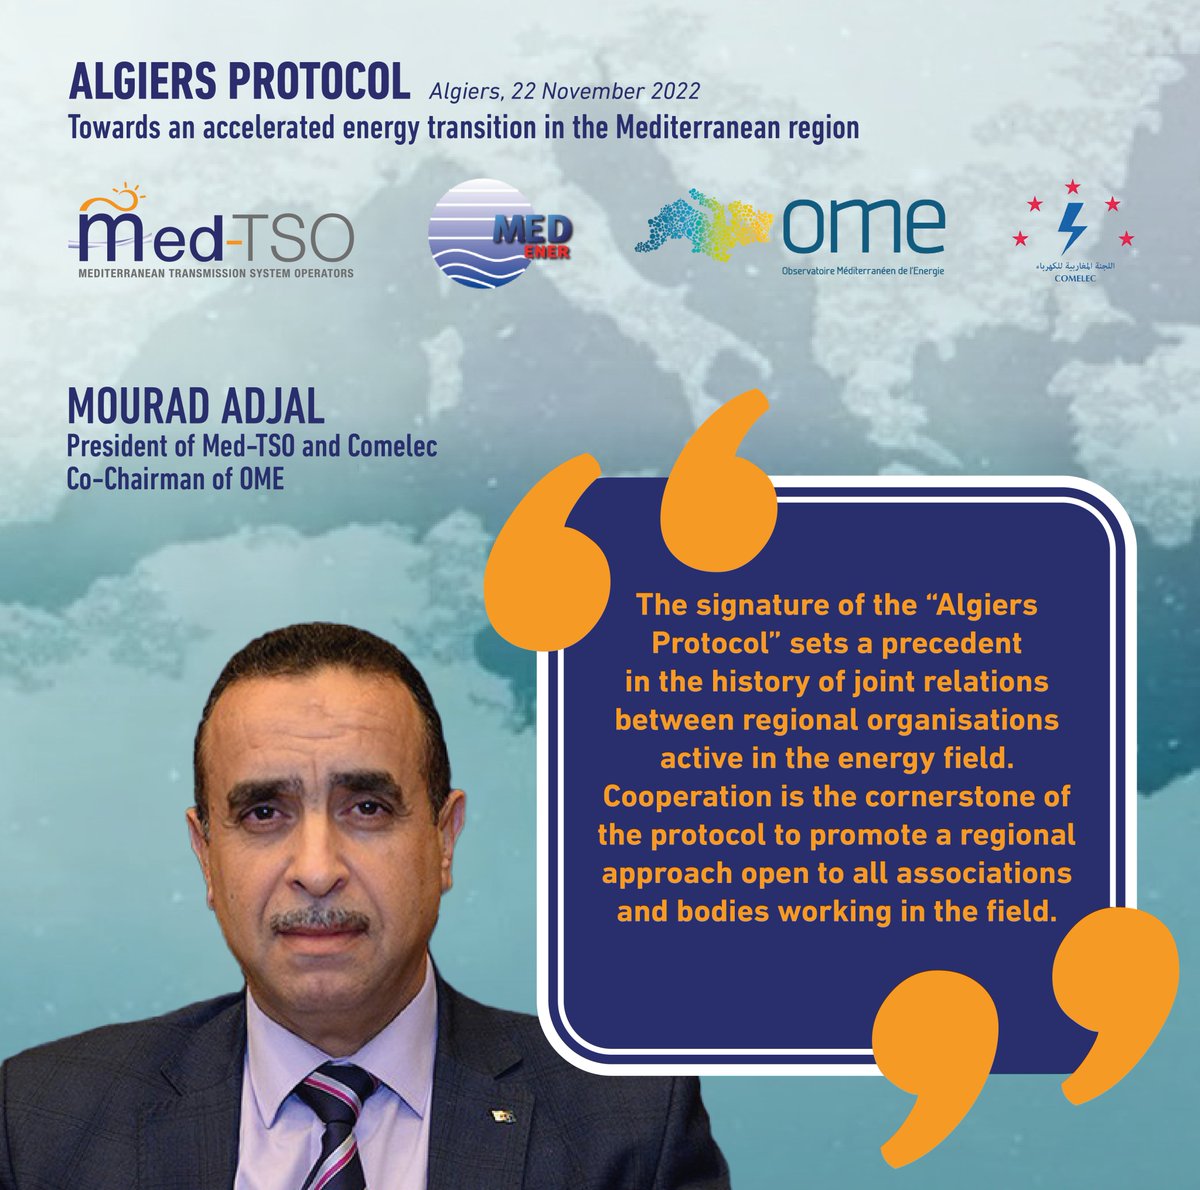 The mutual interest and sharing of common objectives for accelerating the #Mediterraneanenergy transition led to the signature of the Algiers Protocol for #cooperation with #COMELEC, @ContactMedener and @OME_cooperation. 
Read the words of #MedTSO President Mourad Adjal⬇️